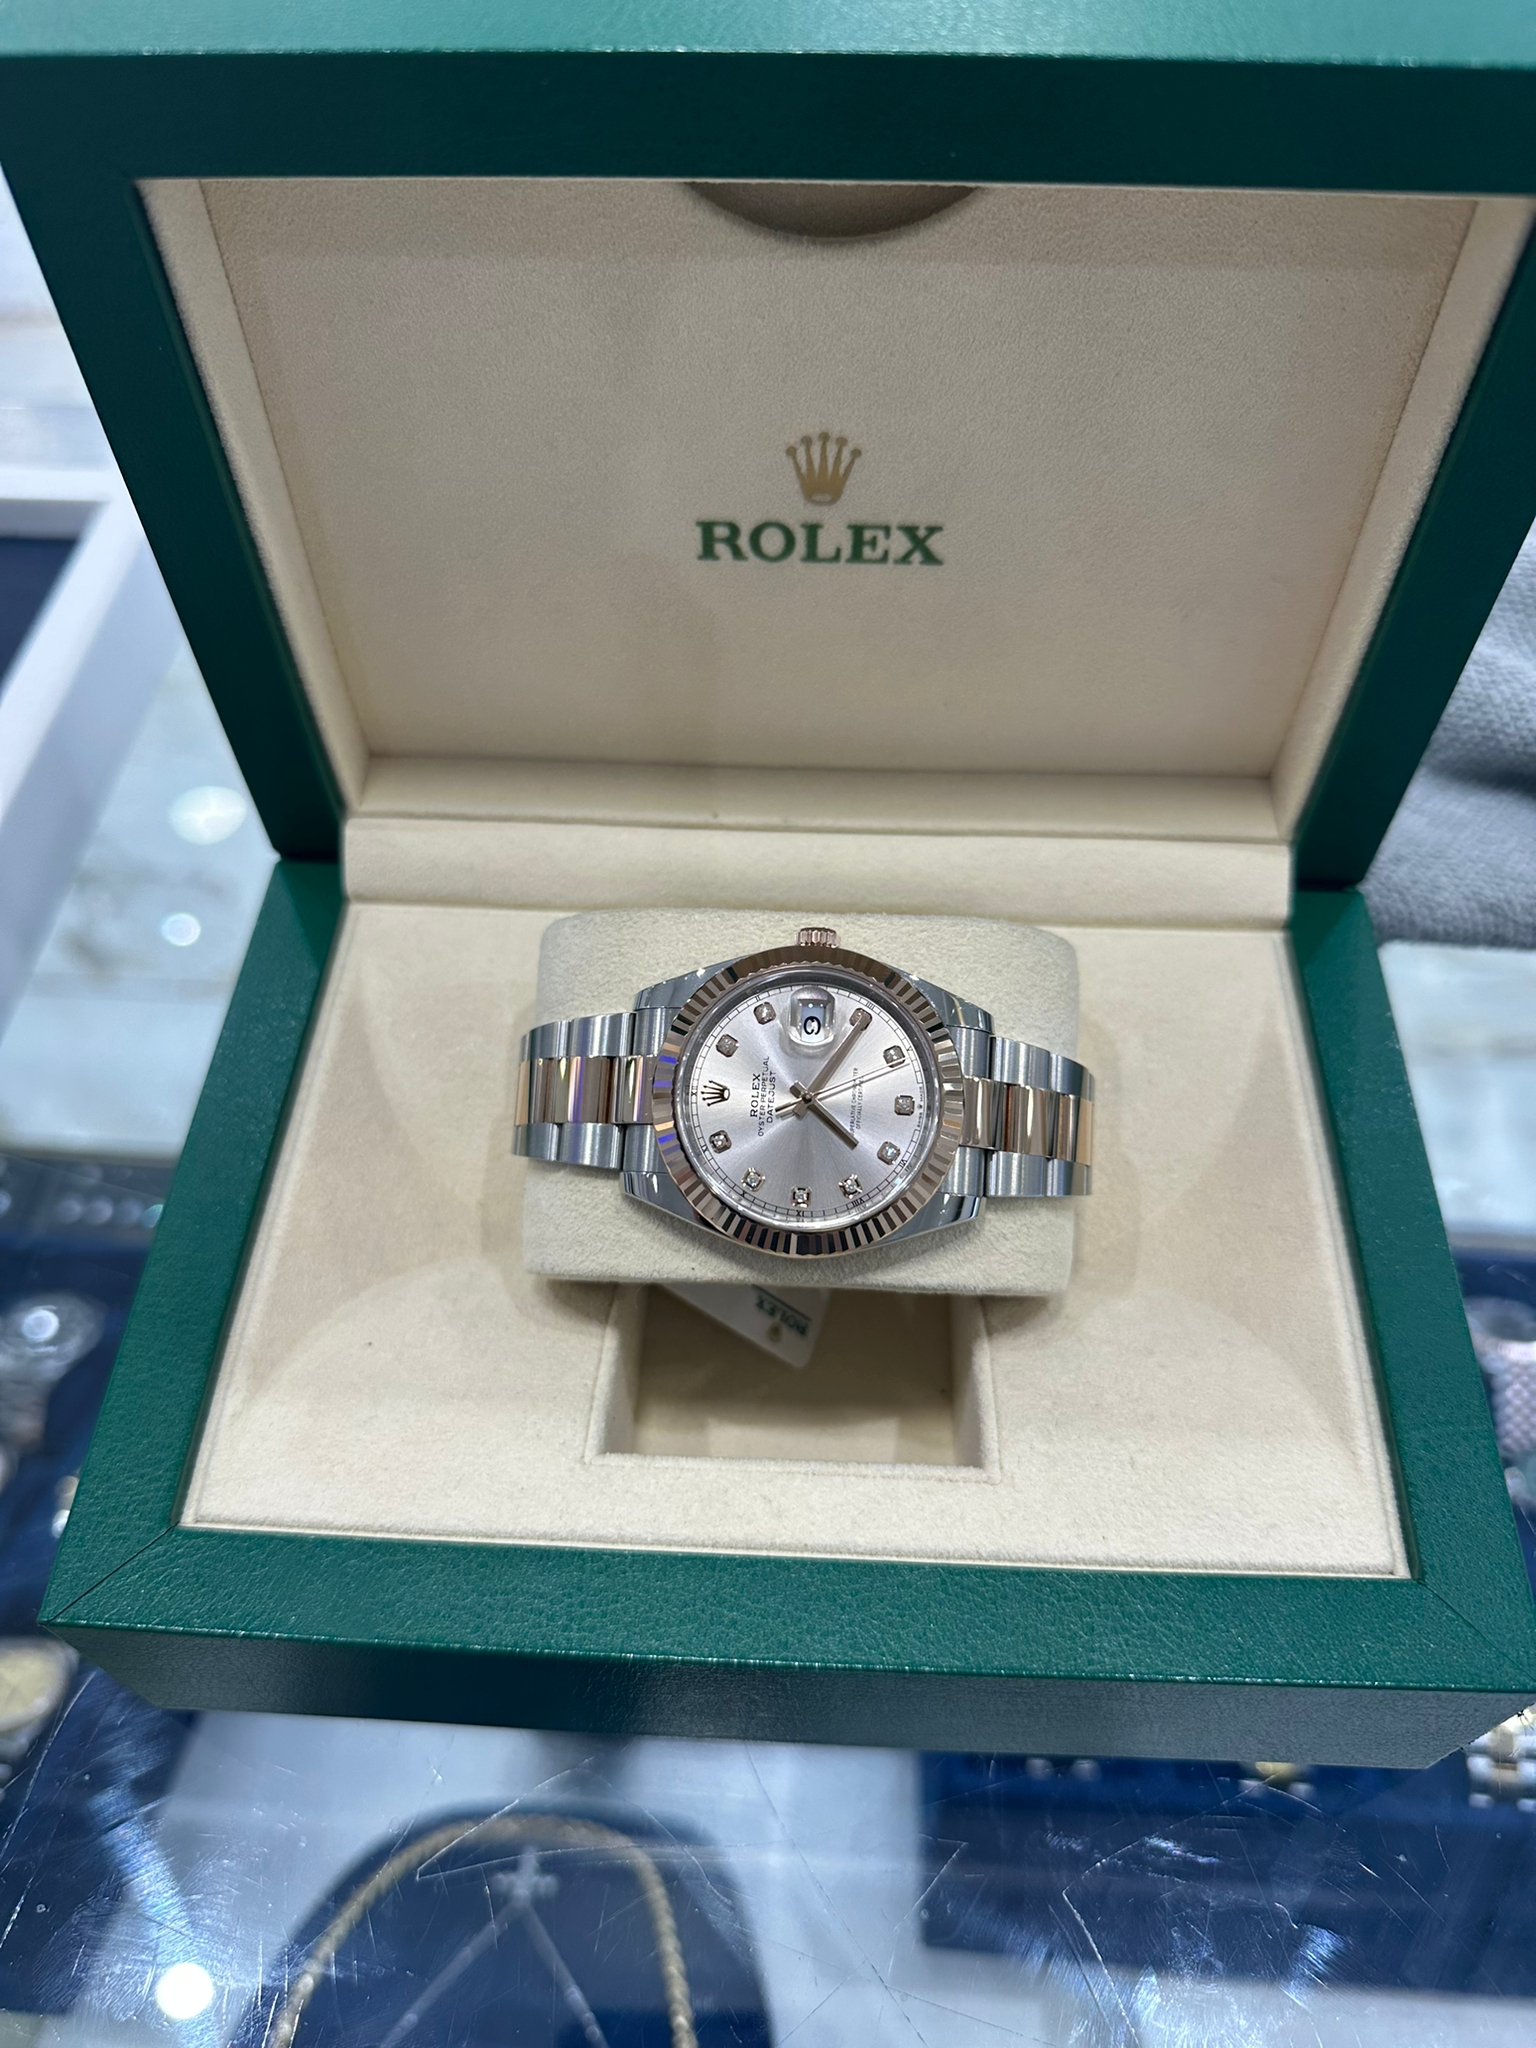 Rolex Datejust 41mm steel and rose gold with Sundu - Image 2 of 11